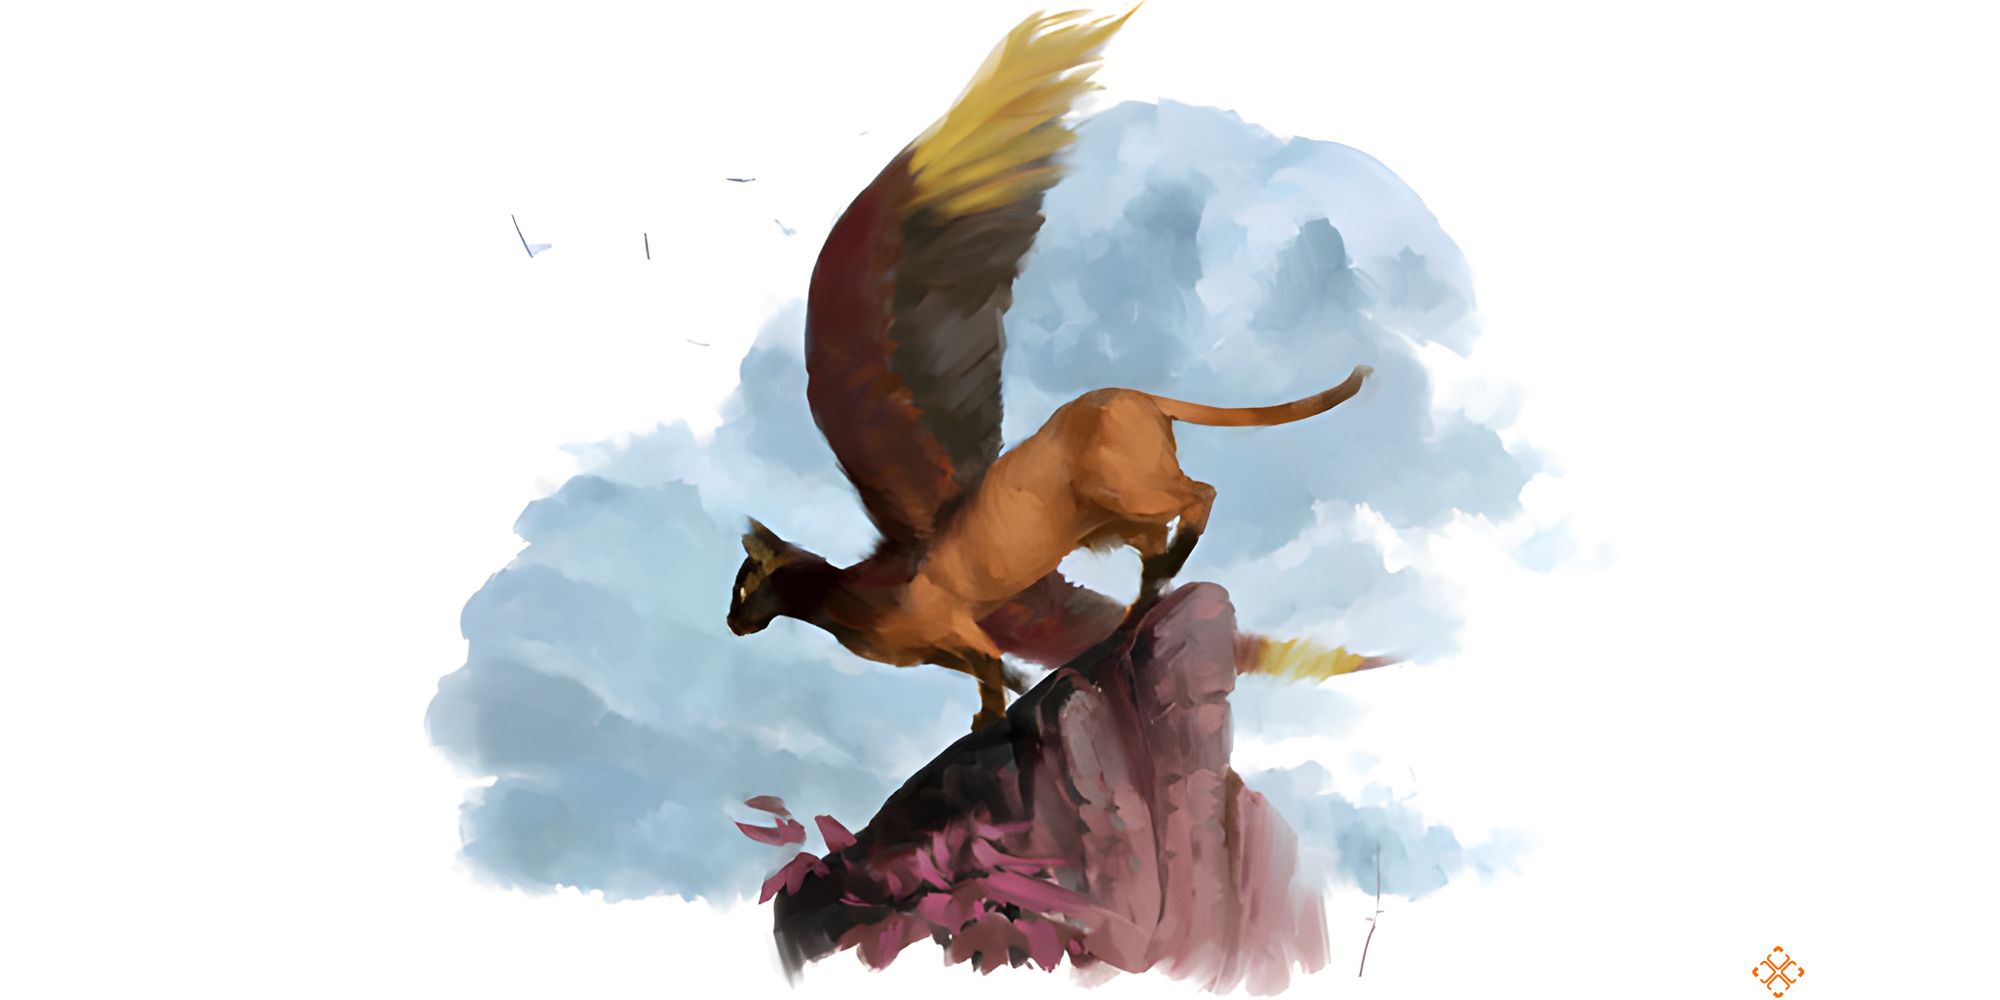 A Tressym – a cat with wings – in D&D